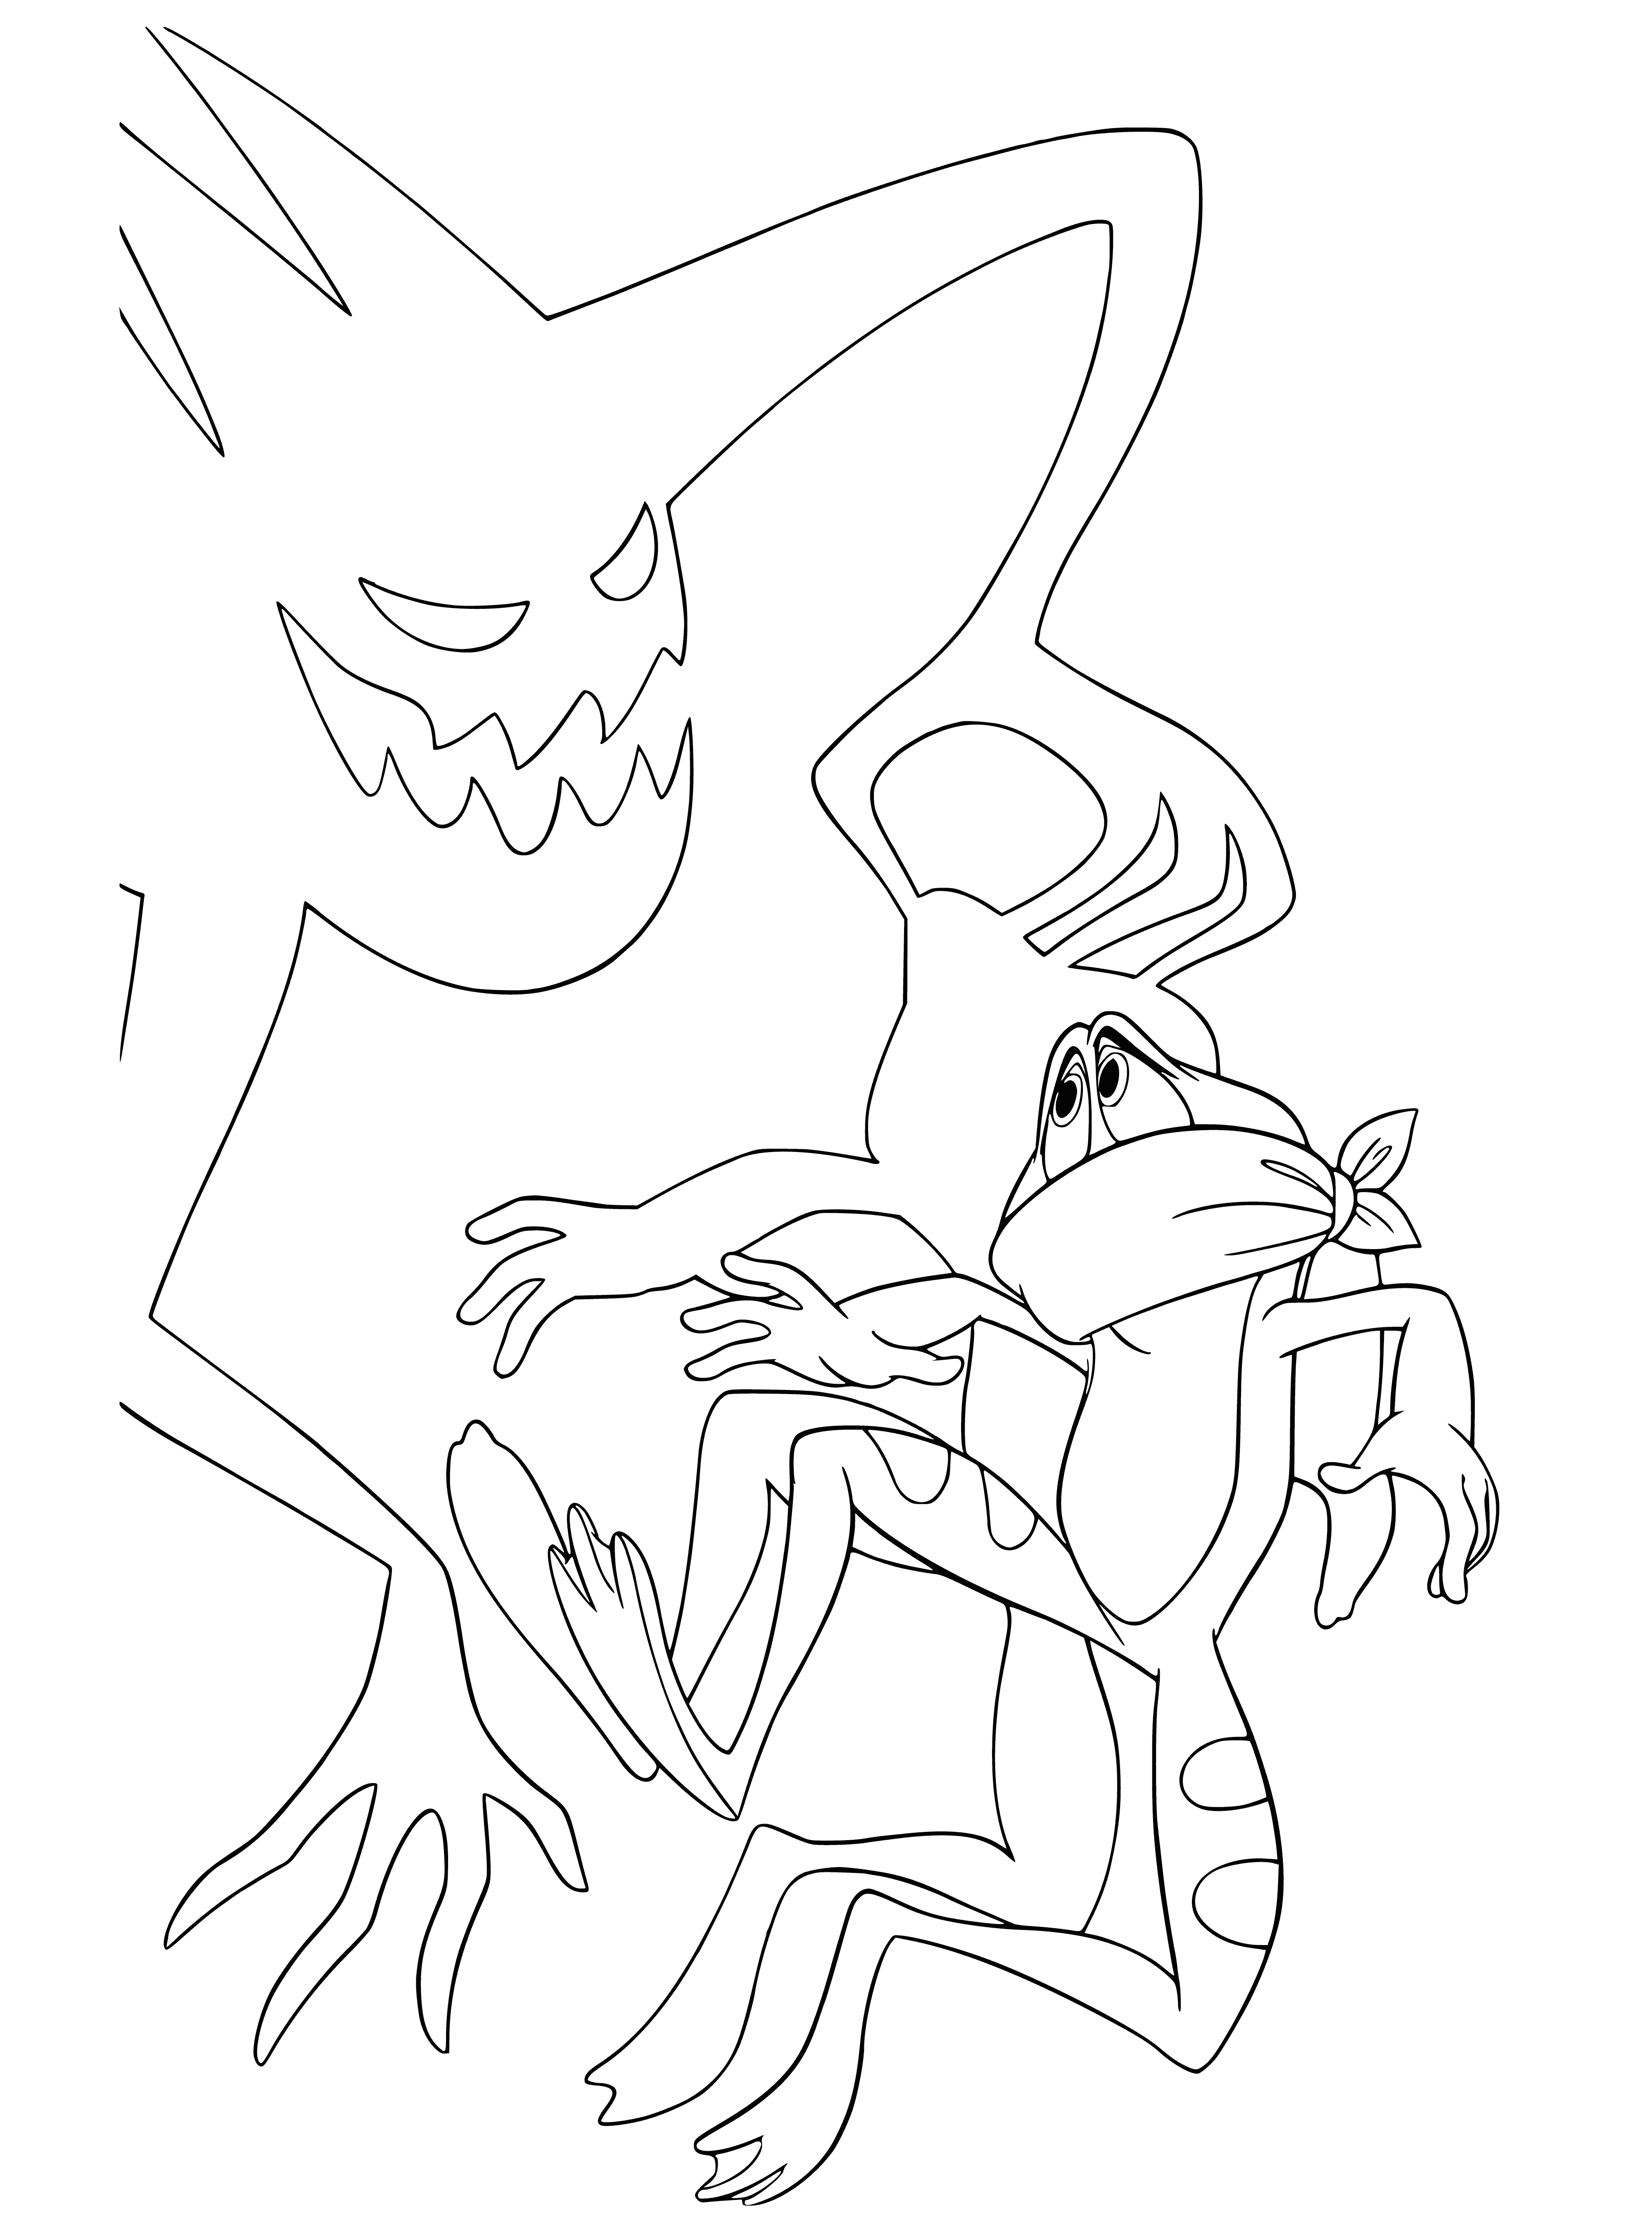 coloring page: Princess held captive by frog-like creature; frog has green body & yellow belly; princess pale & terrified; frog holds her waist with webbed hands.